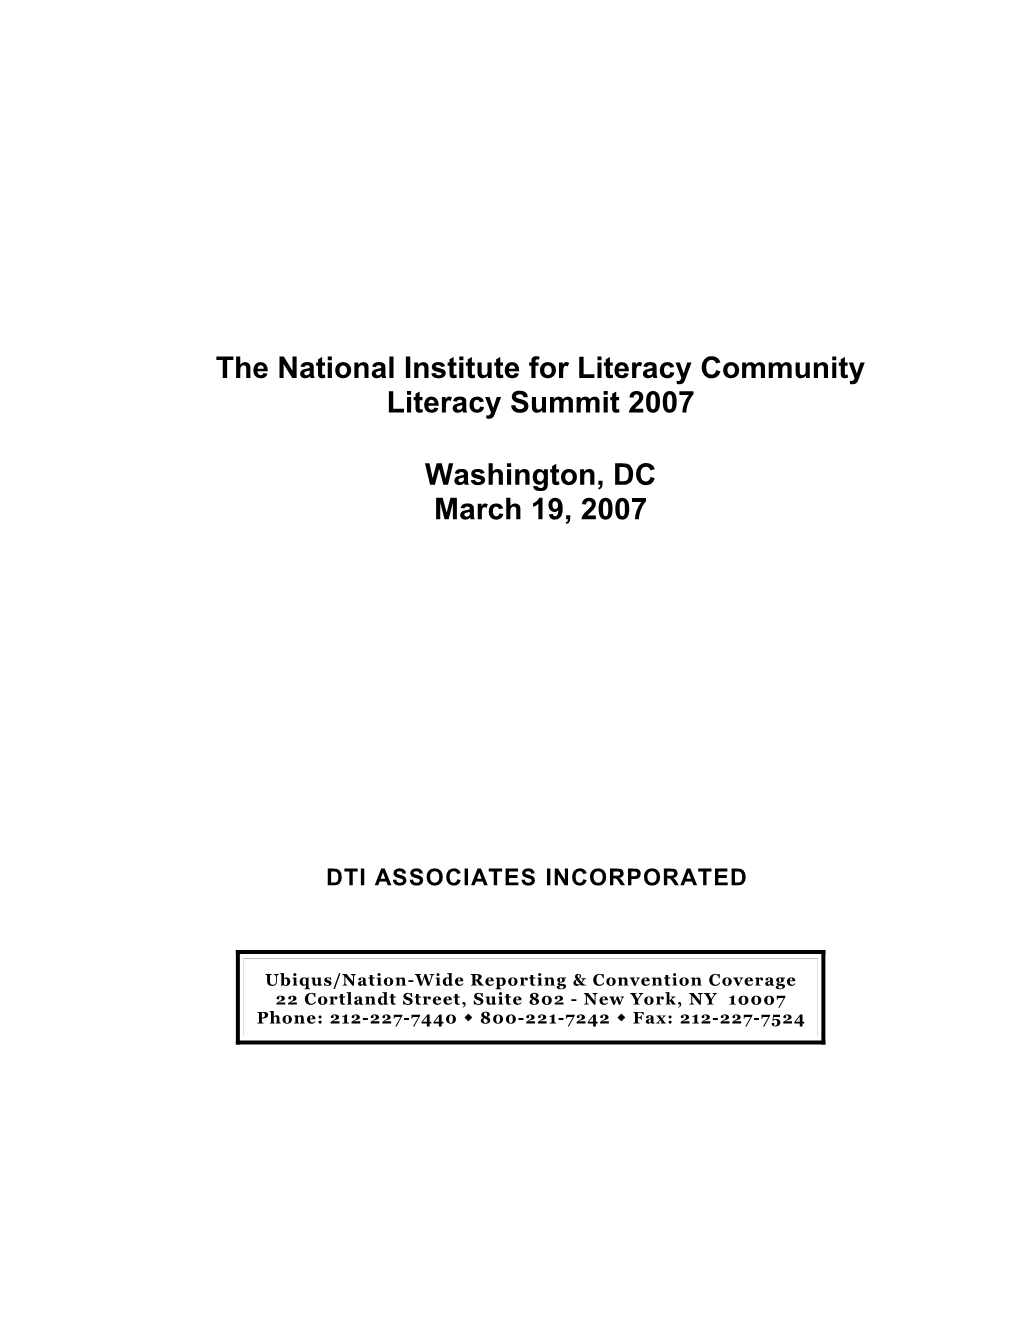 The National Institute for Literacy Community Literacy Summit 2007